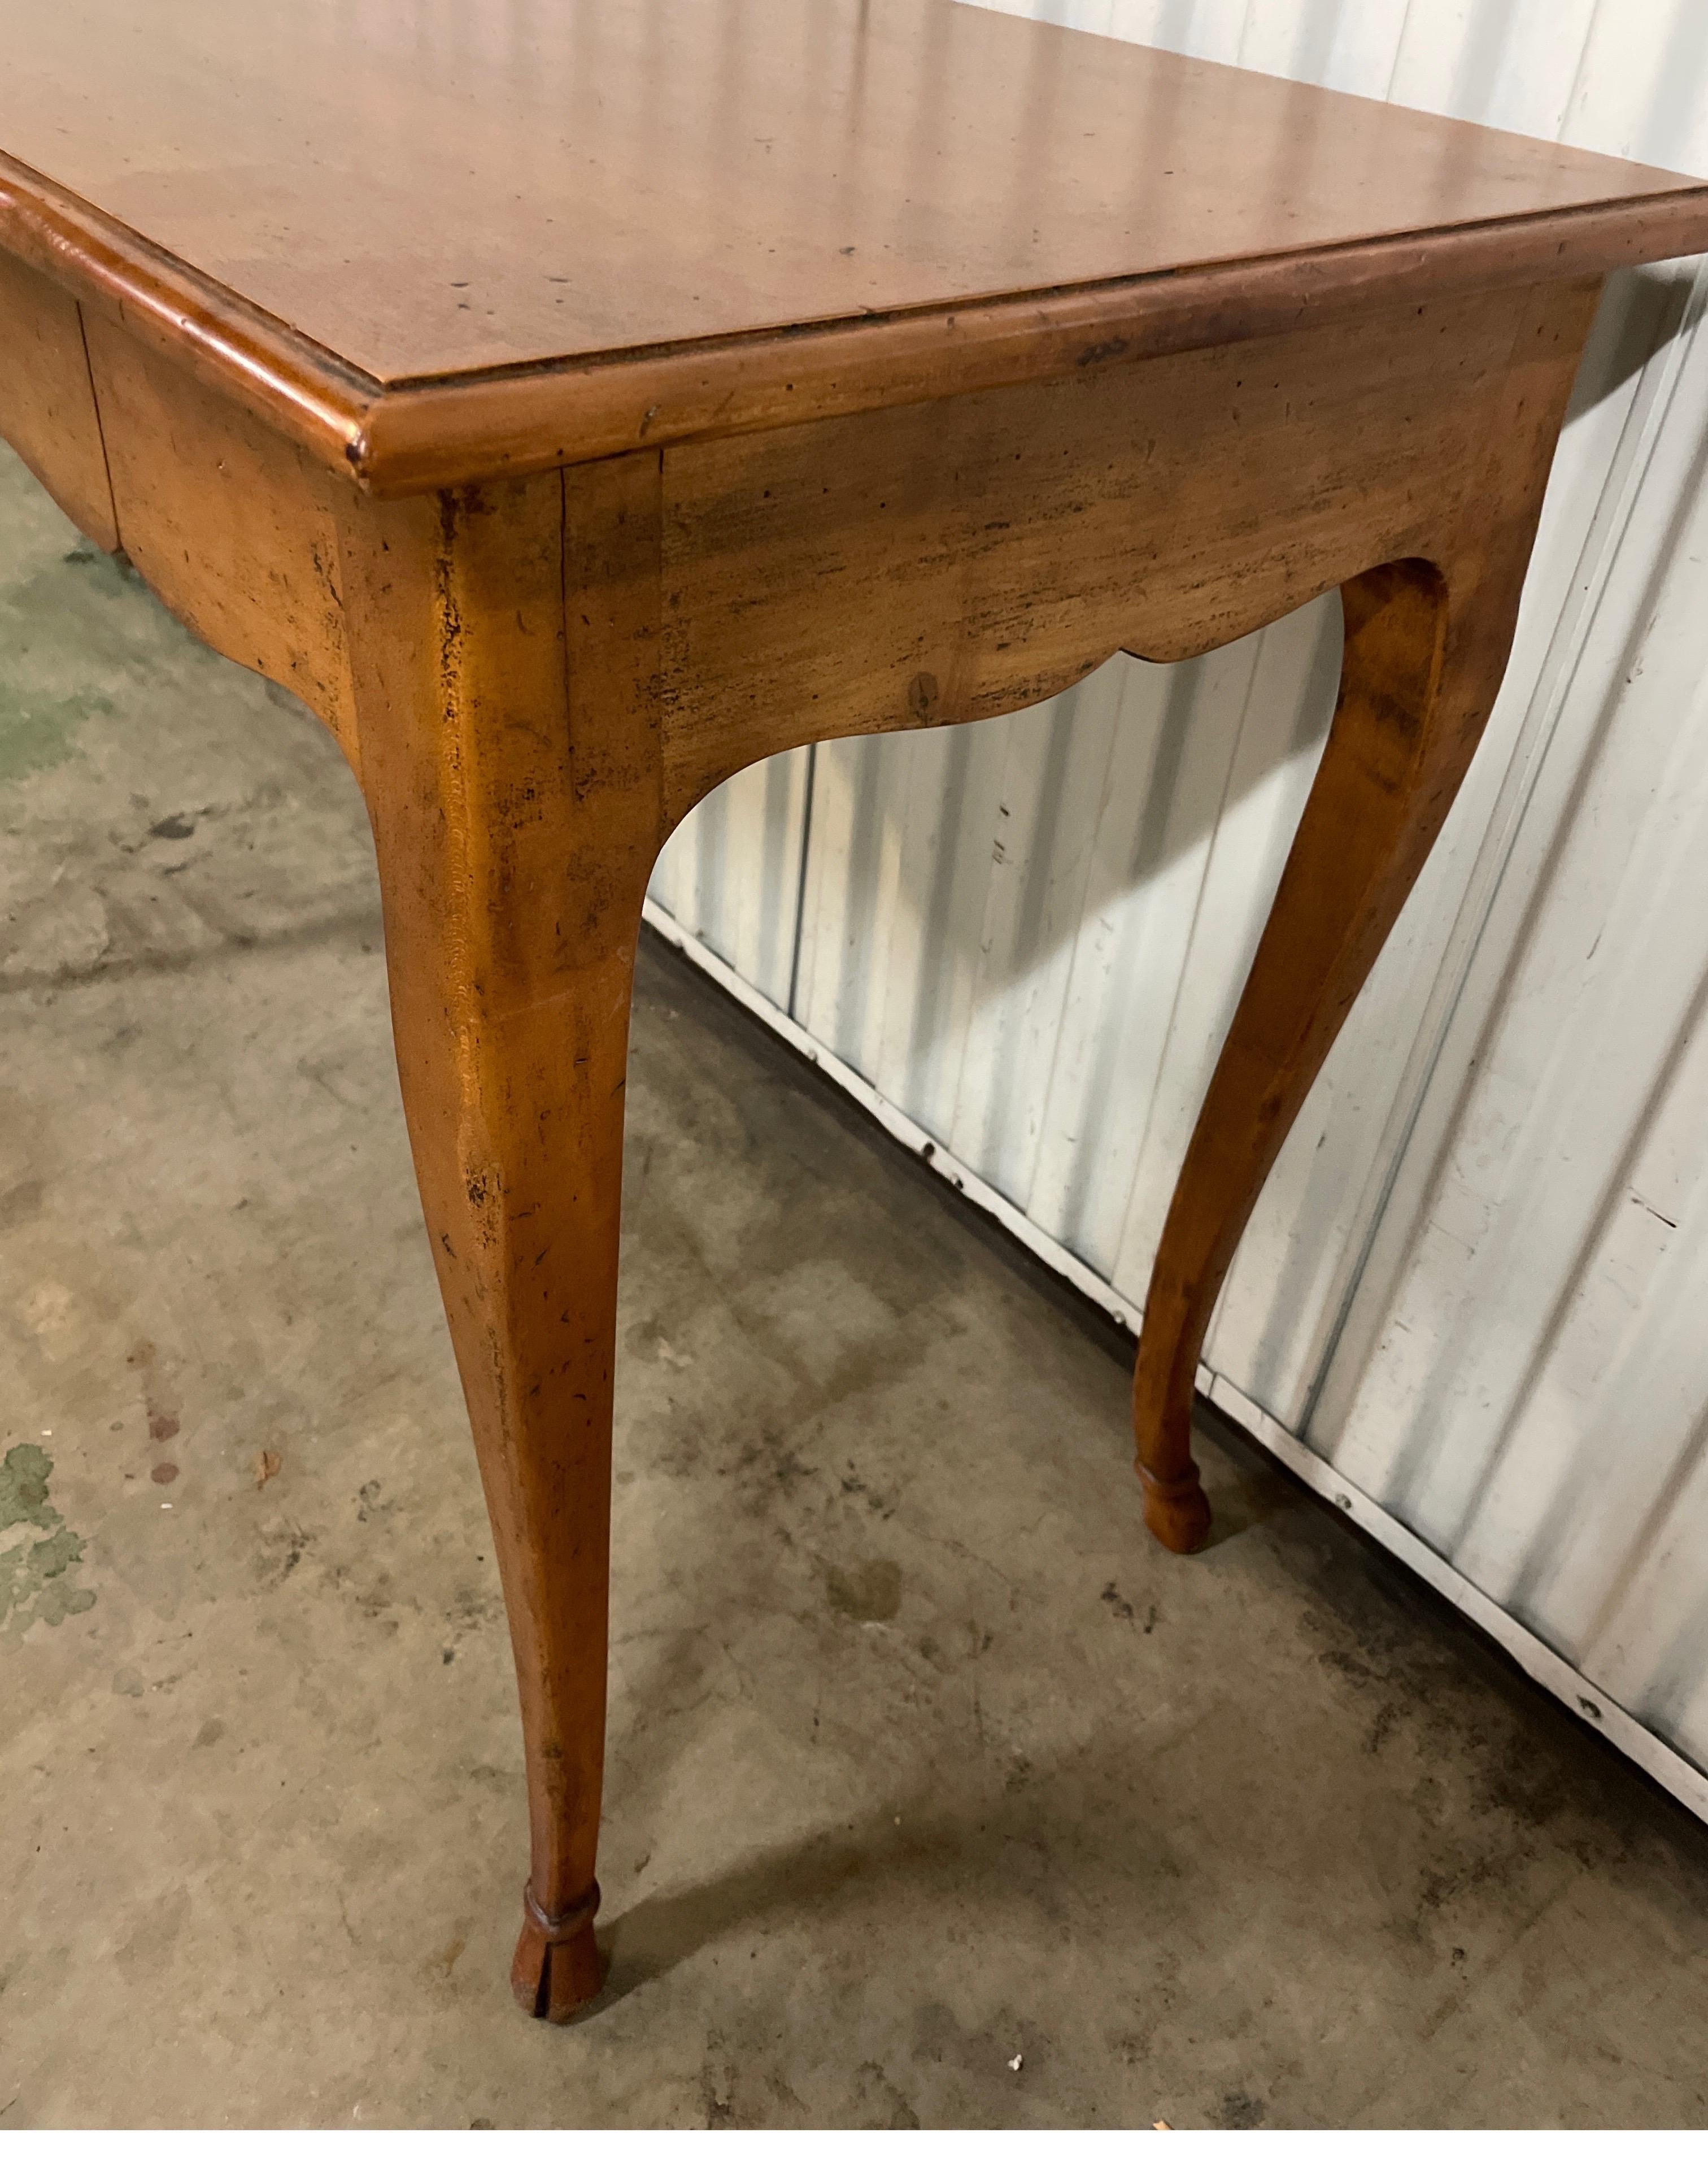 20th Century Country French Style Desk with Hoof Feet